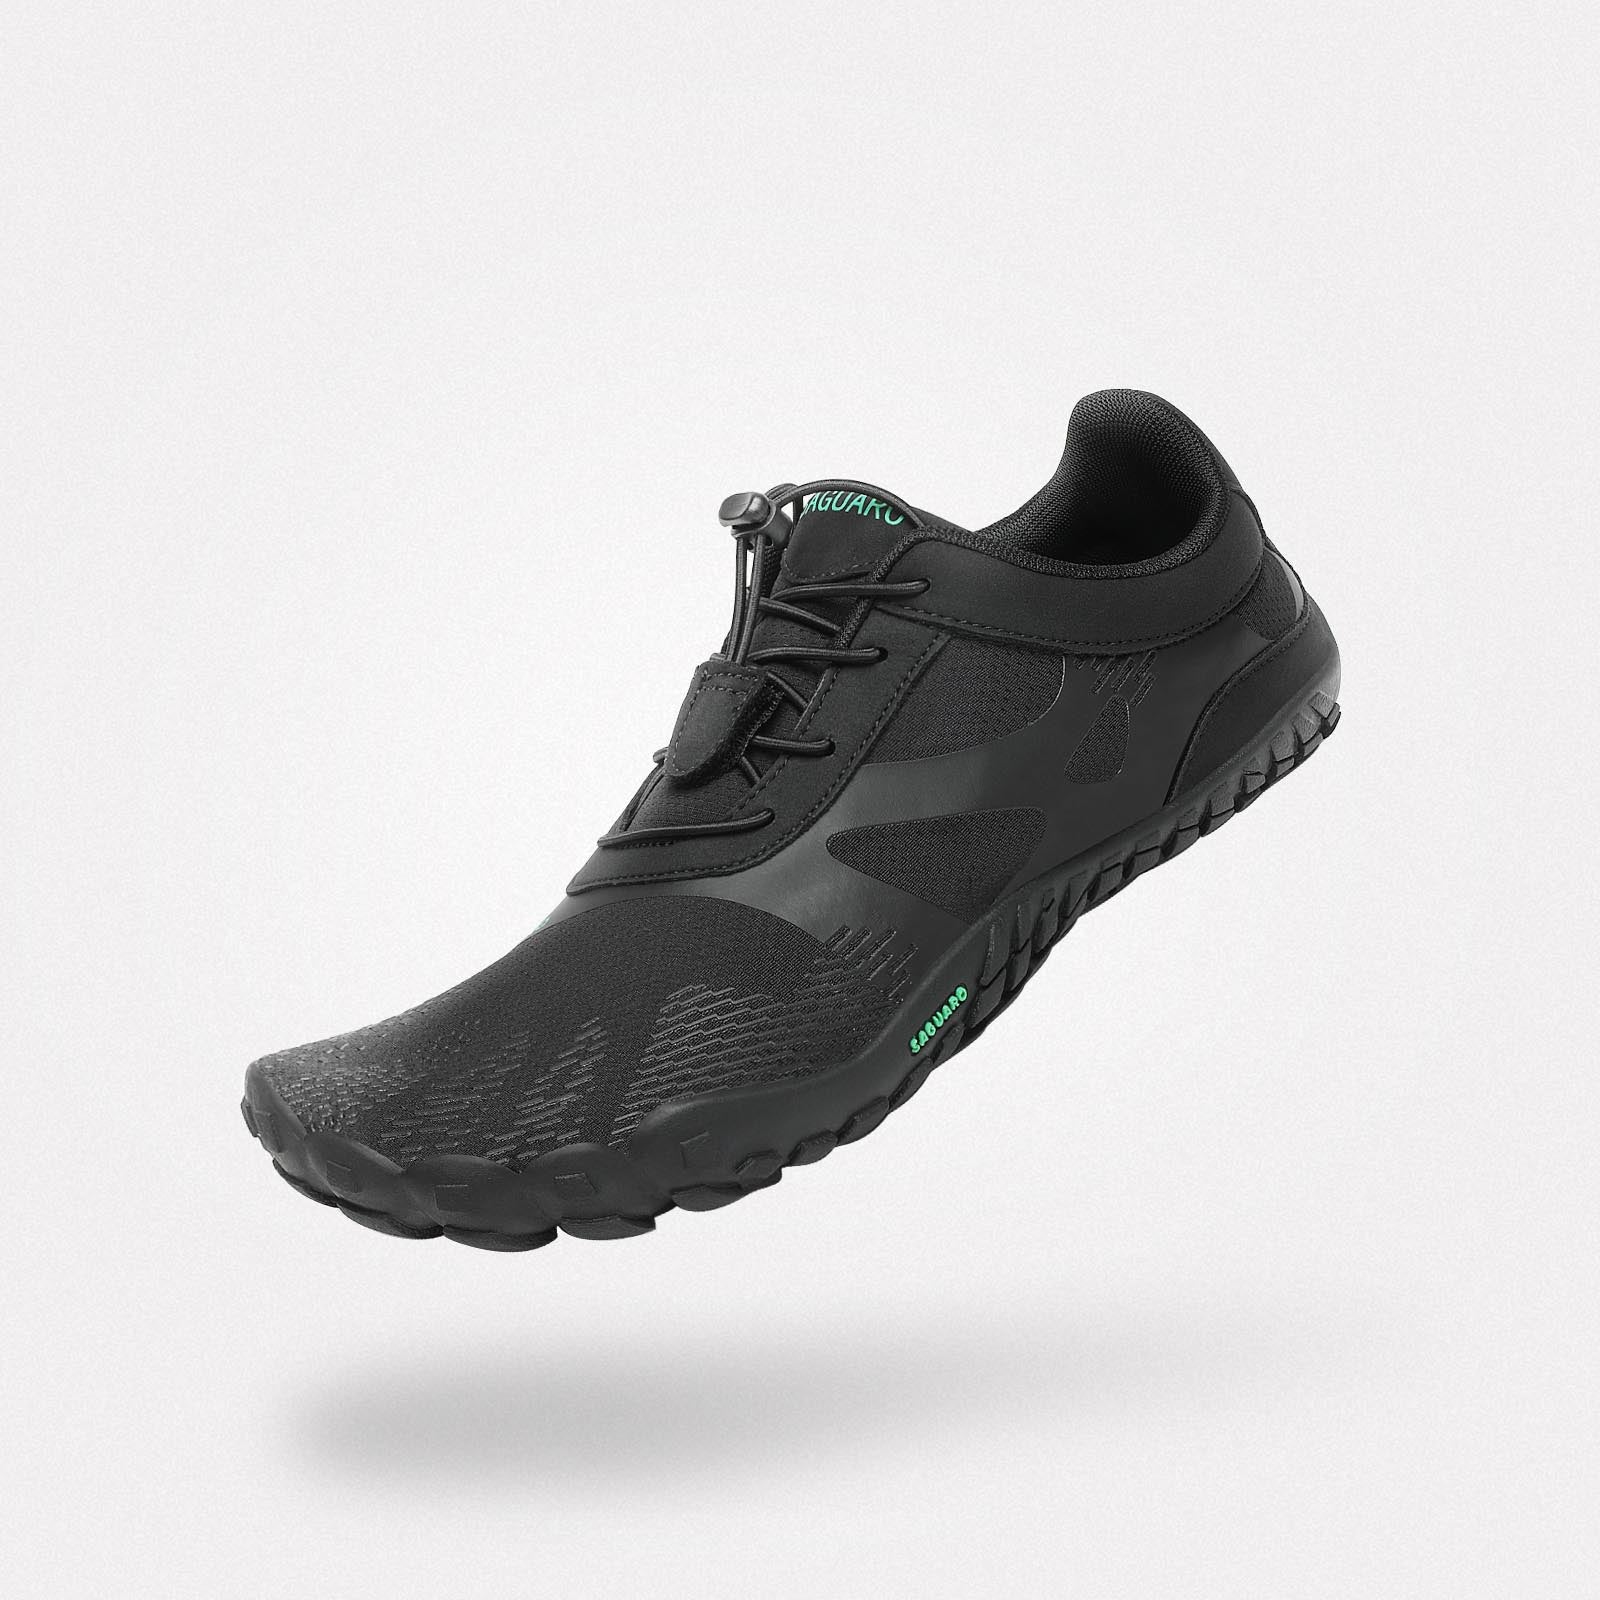 Saguaro Barefoot Shoes Review - Affordable Sneakers for the Whole